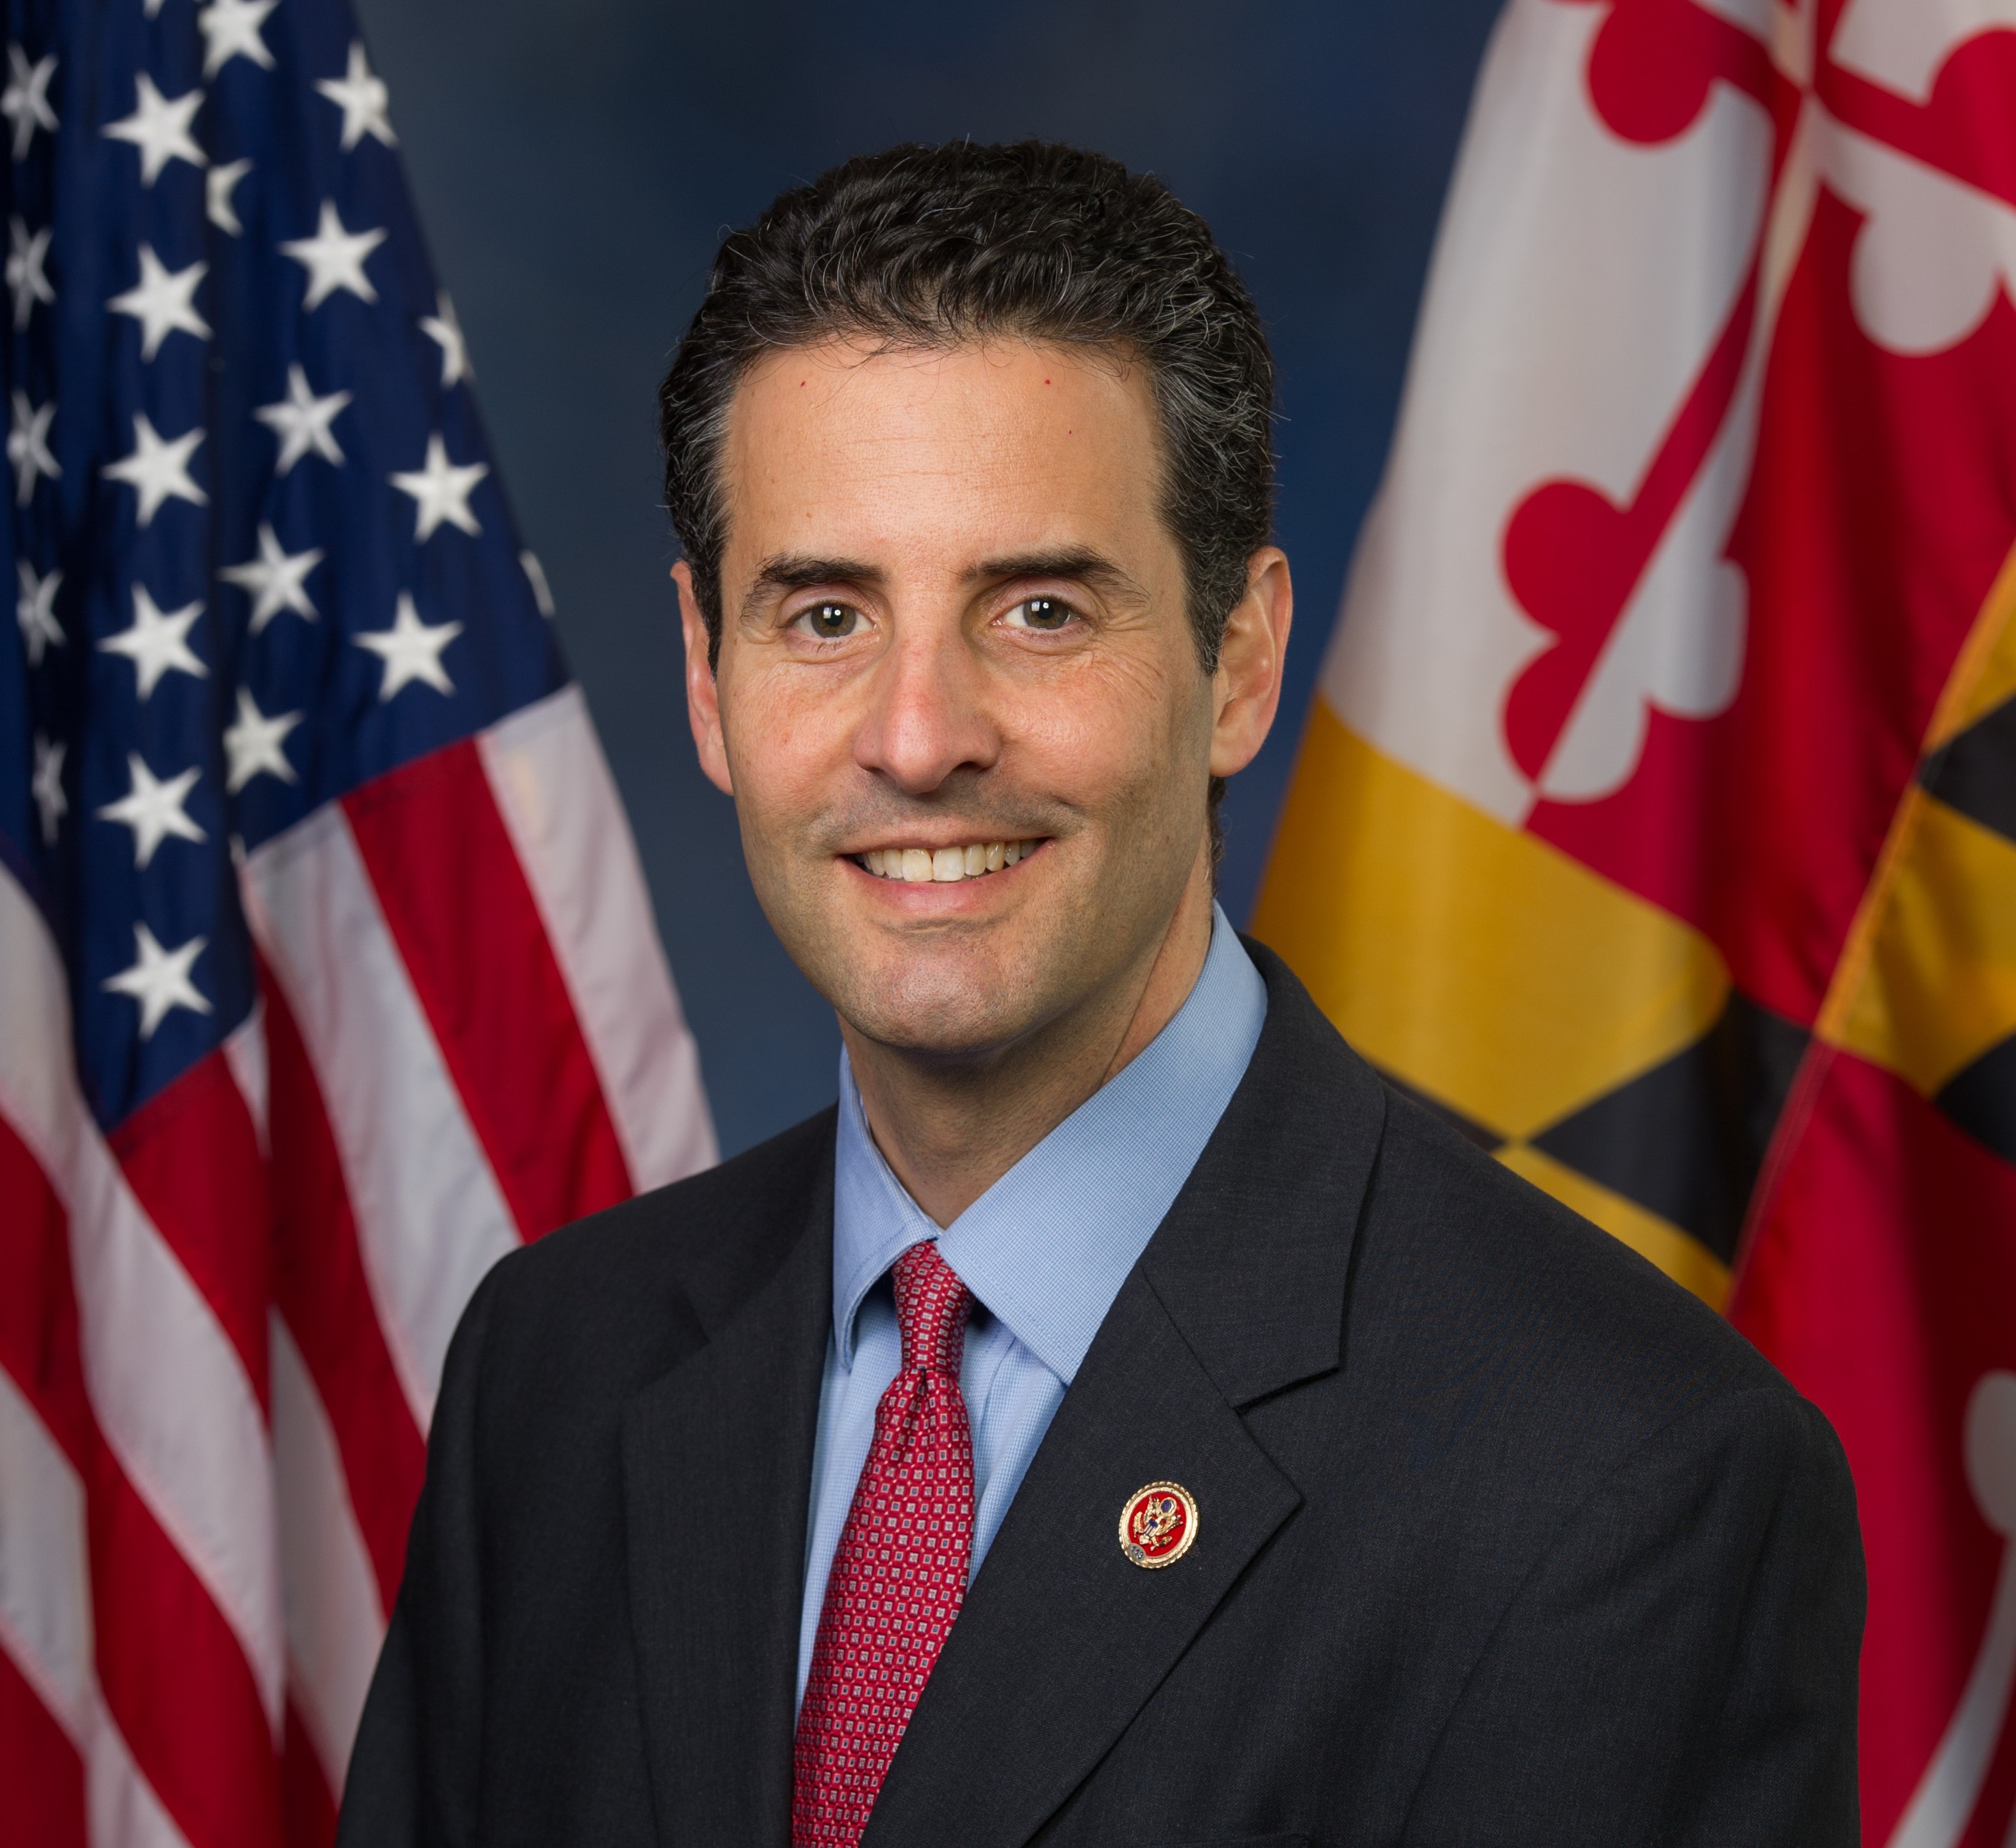 John Sarbanes - U.S. Representative for Maryland's 3rd Congressional District - Guest